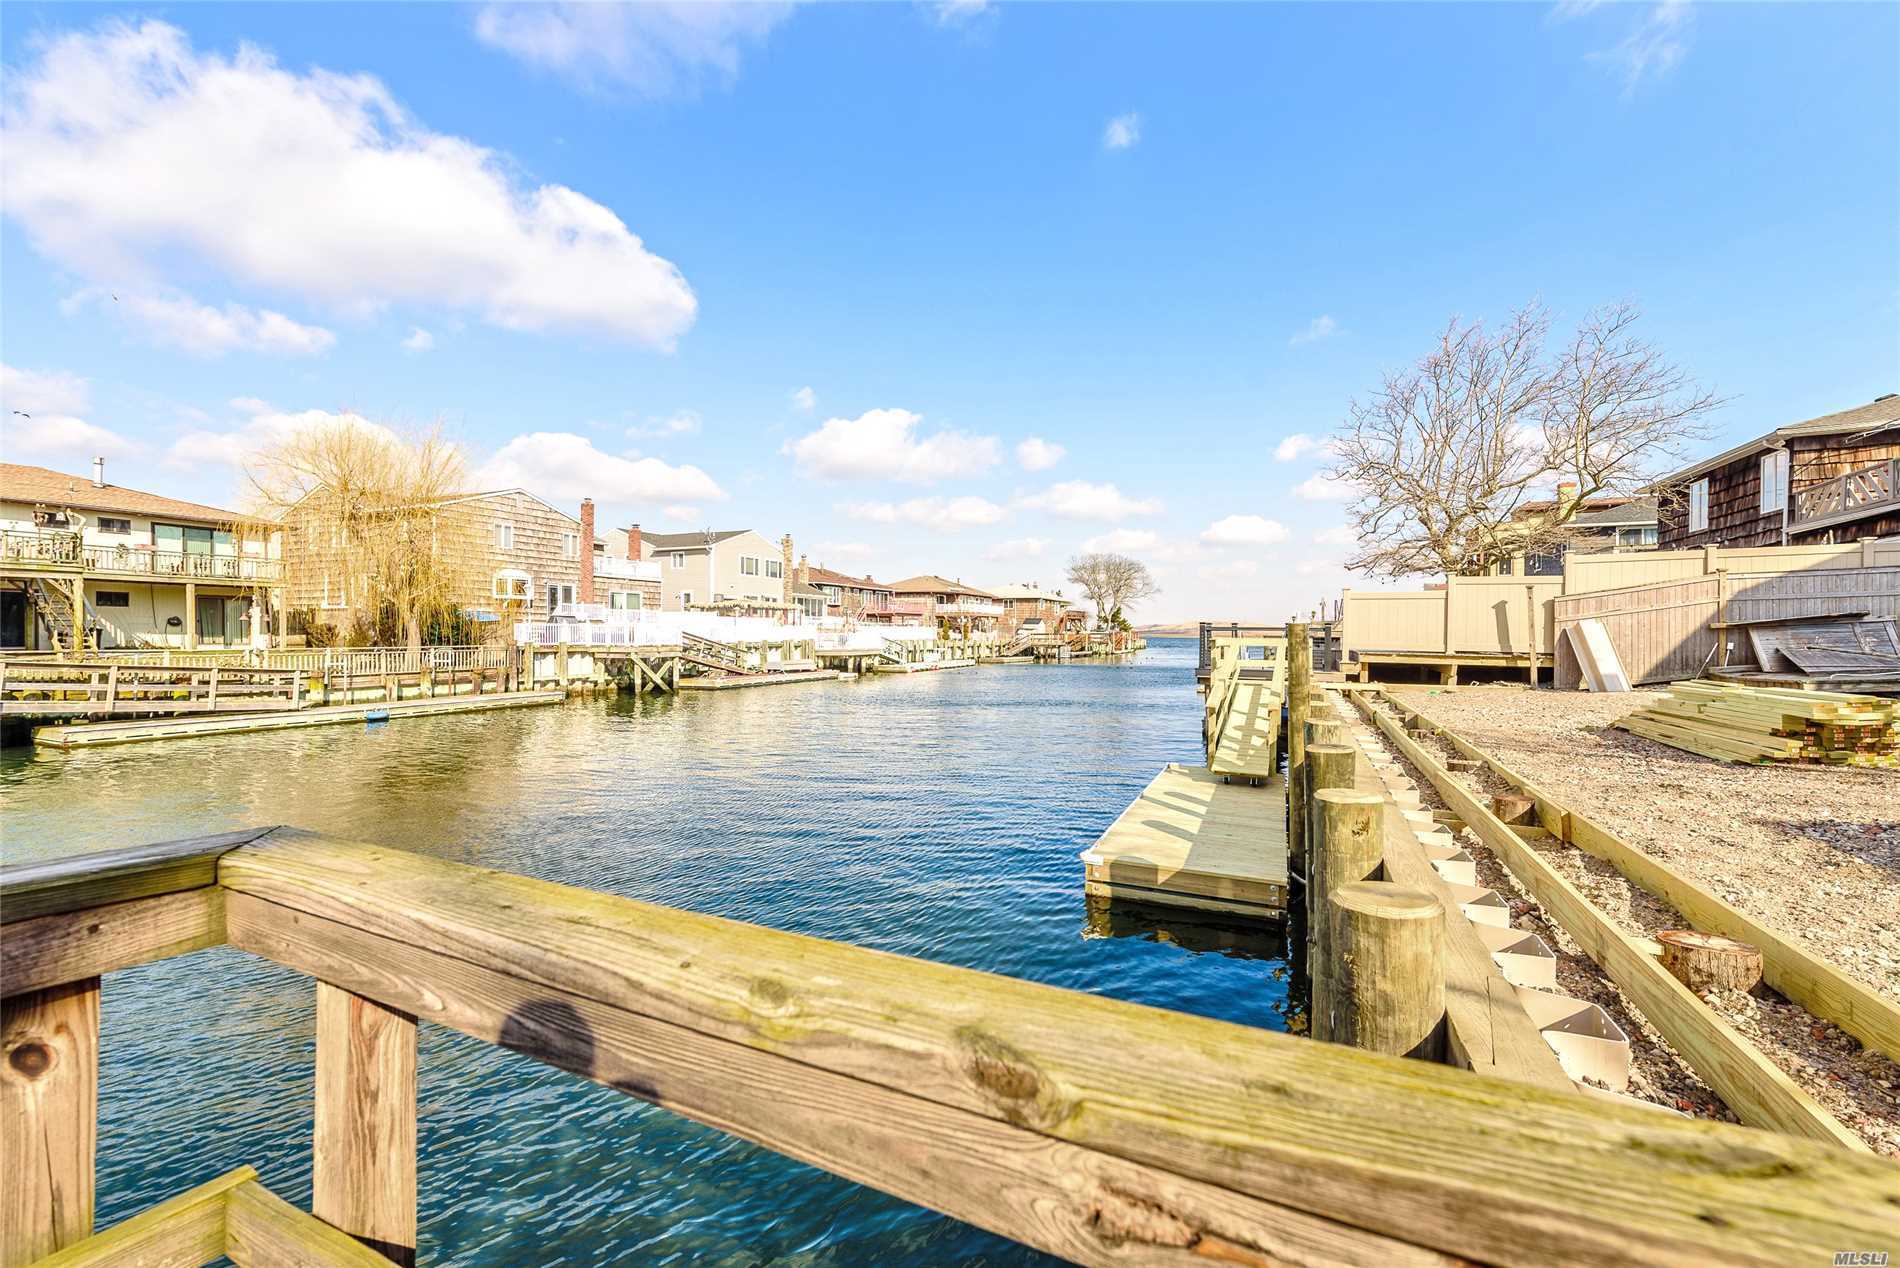 Lido Beach. Large Waterfront 5 Bedroom, 3 Full Bath Colonial, Large Eat In Kitchen, Huge Great Room With Fireplace. Master Suite With Huge Closet, Dressing Area, Full Bath, And Sauna. Porch Deck And Patio.